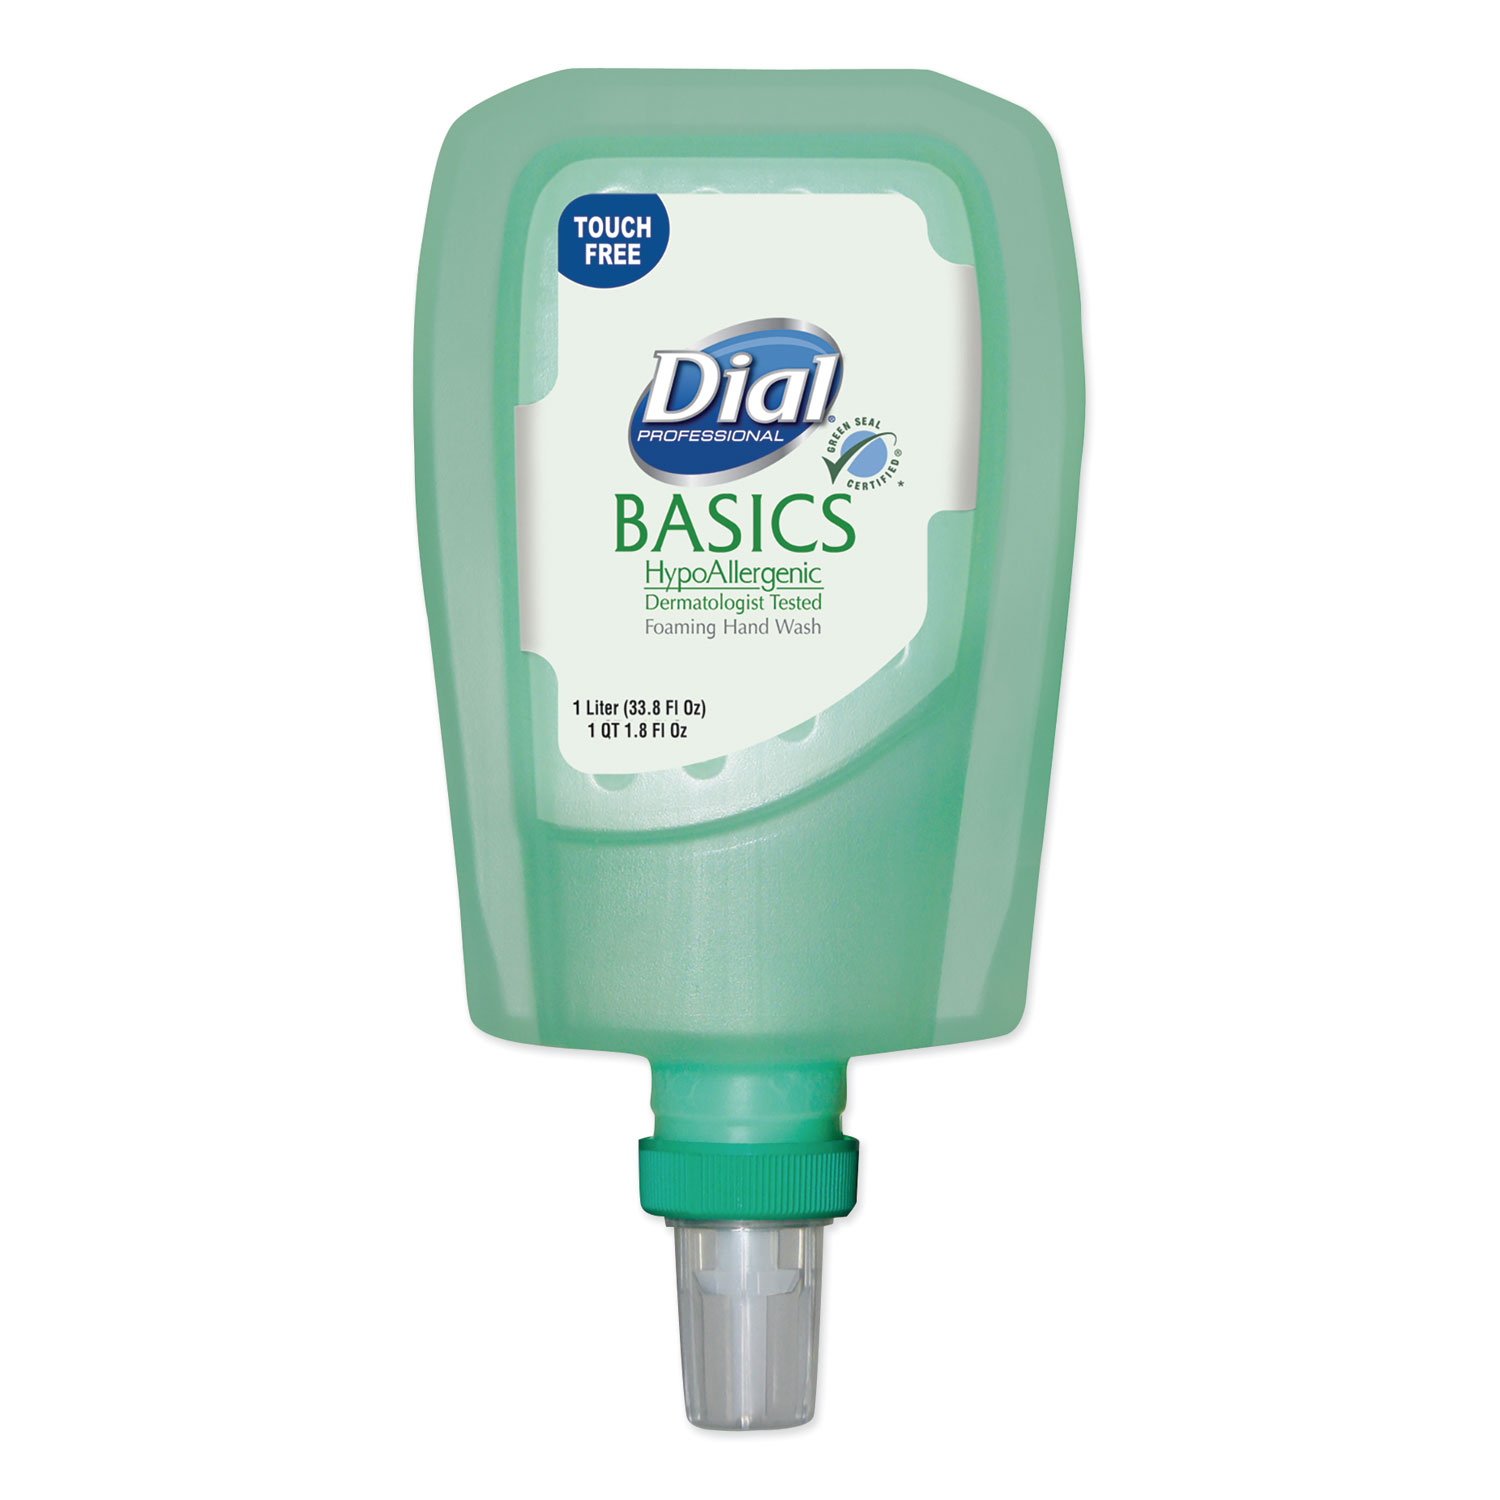  Dial 16722EA FIT Basics Hypoallergenic Foaming Hand Wash Universal Touch Free Refill, Honeysuckle, 1 L Refill (DIA16722EA) 